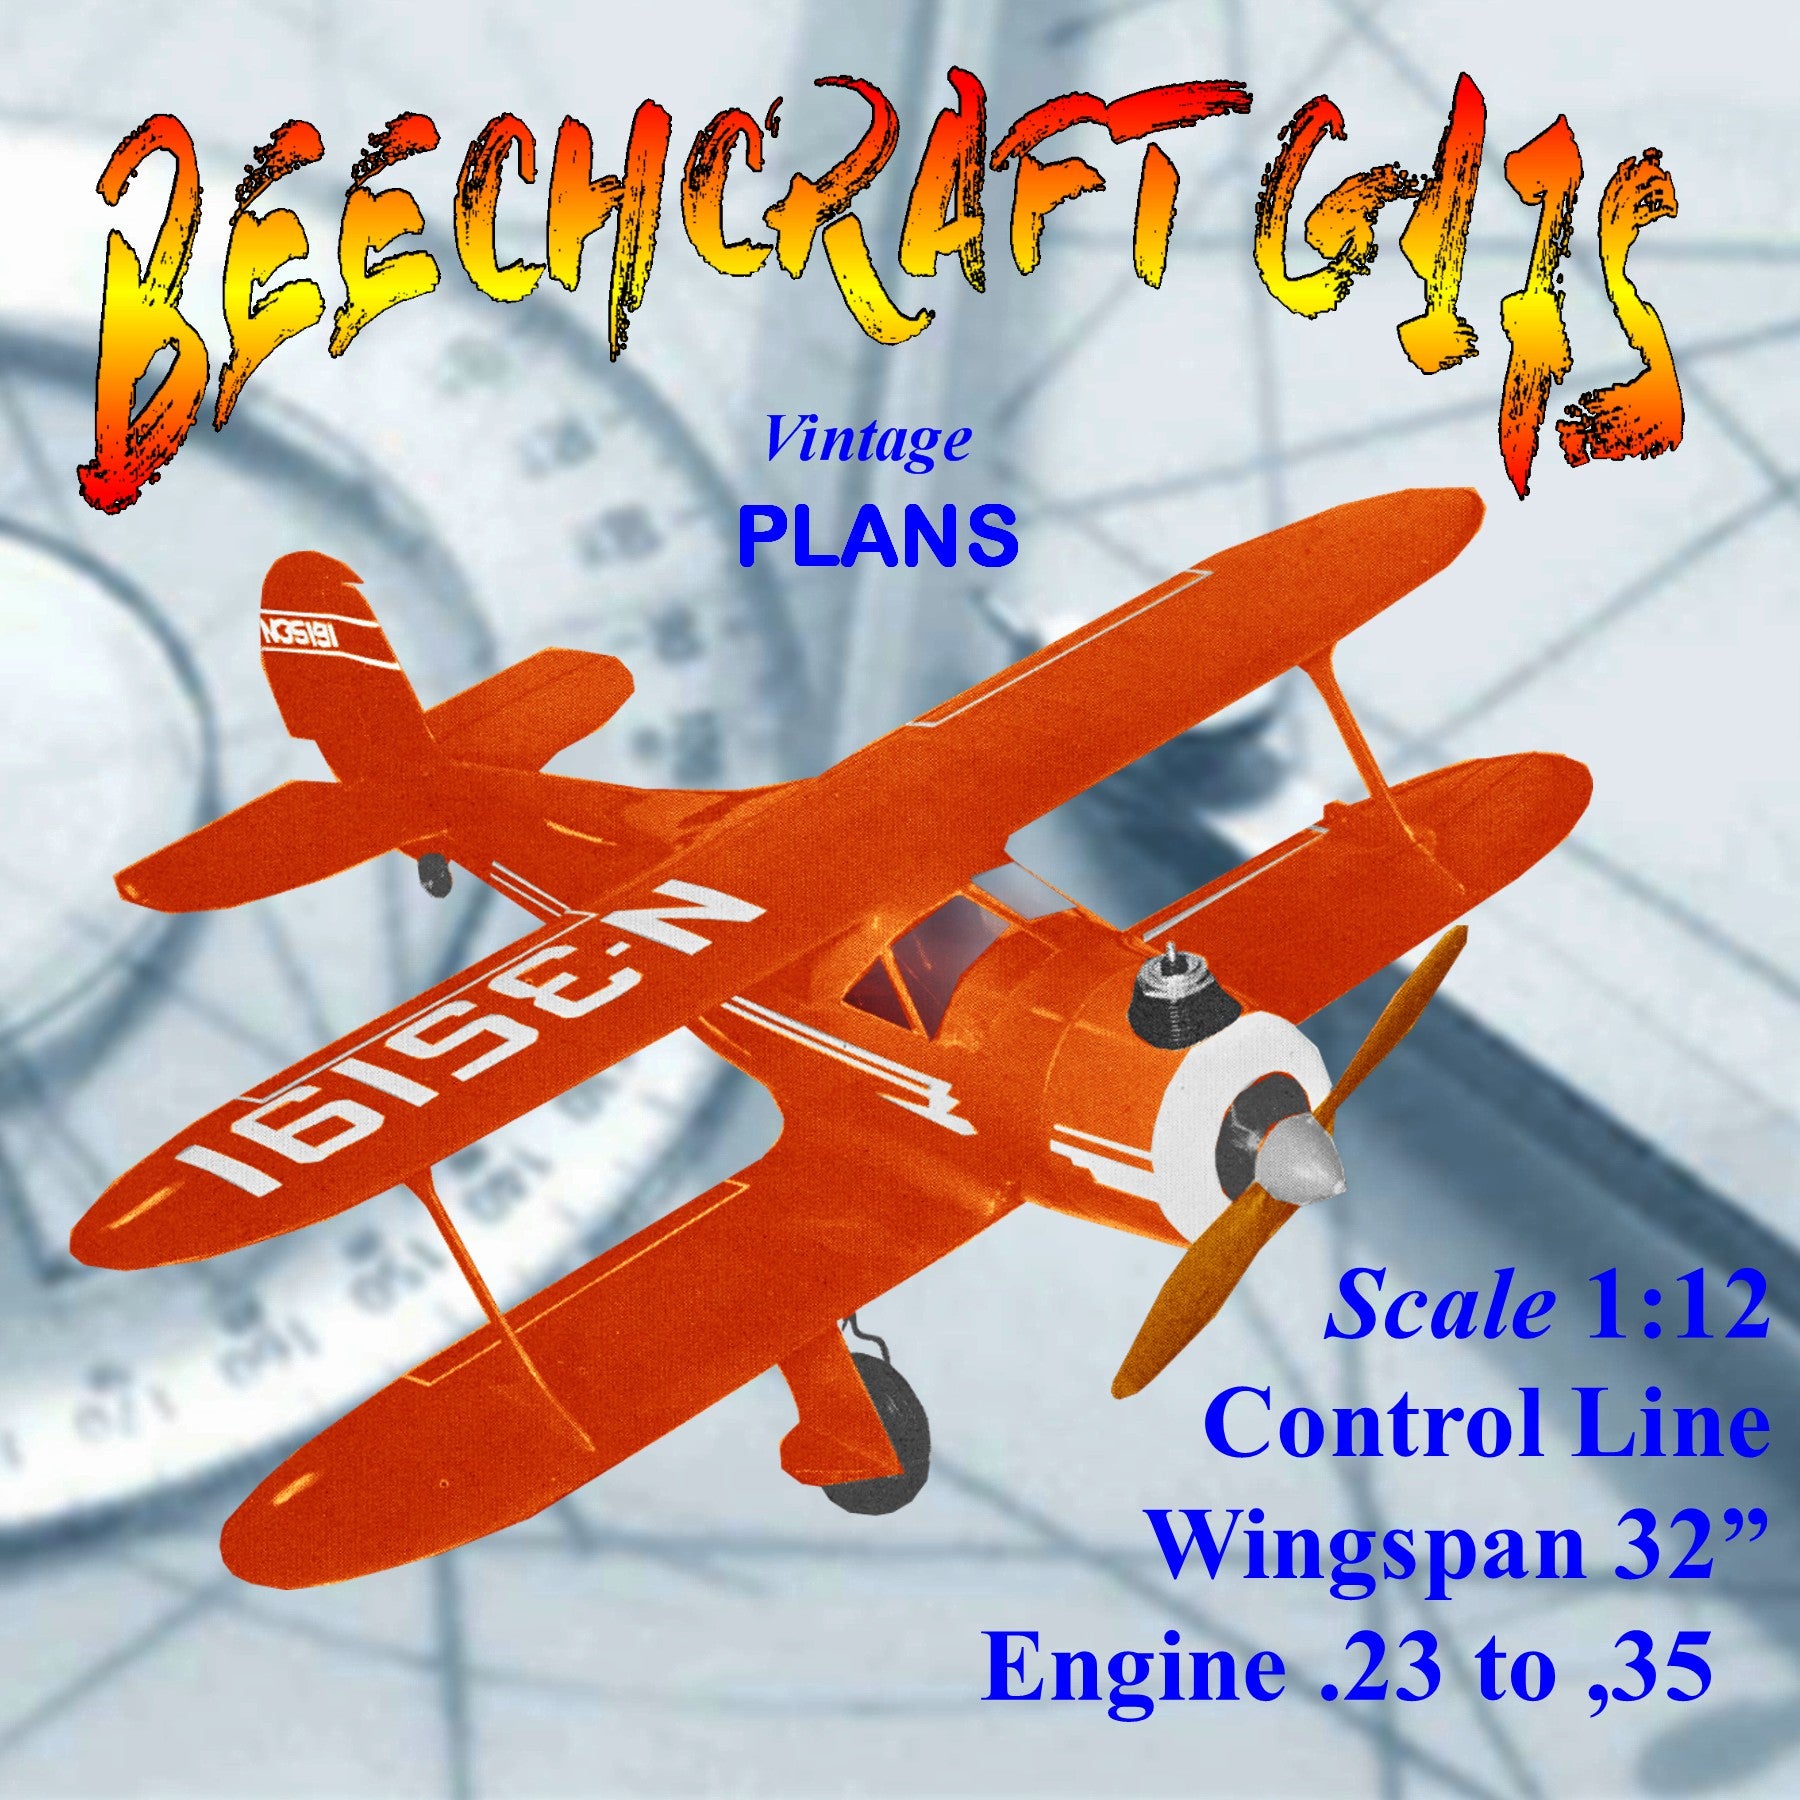 full size printed plans scale 1:12 control line beechcraft g17s   ultimate in performance and appearance.